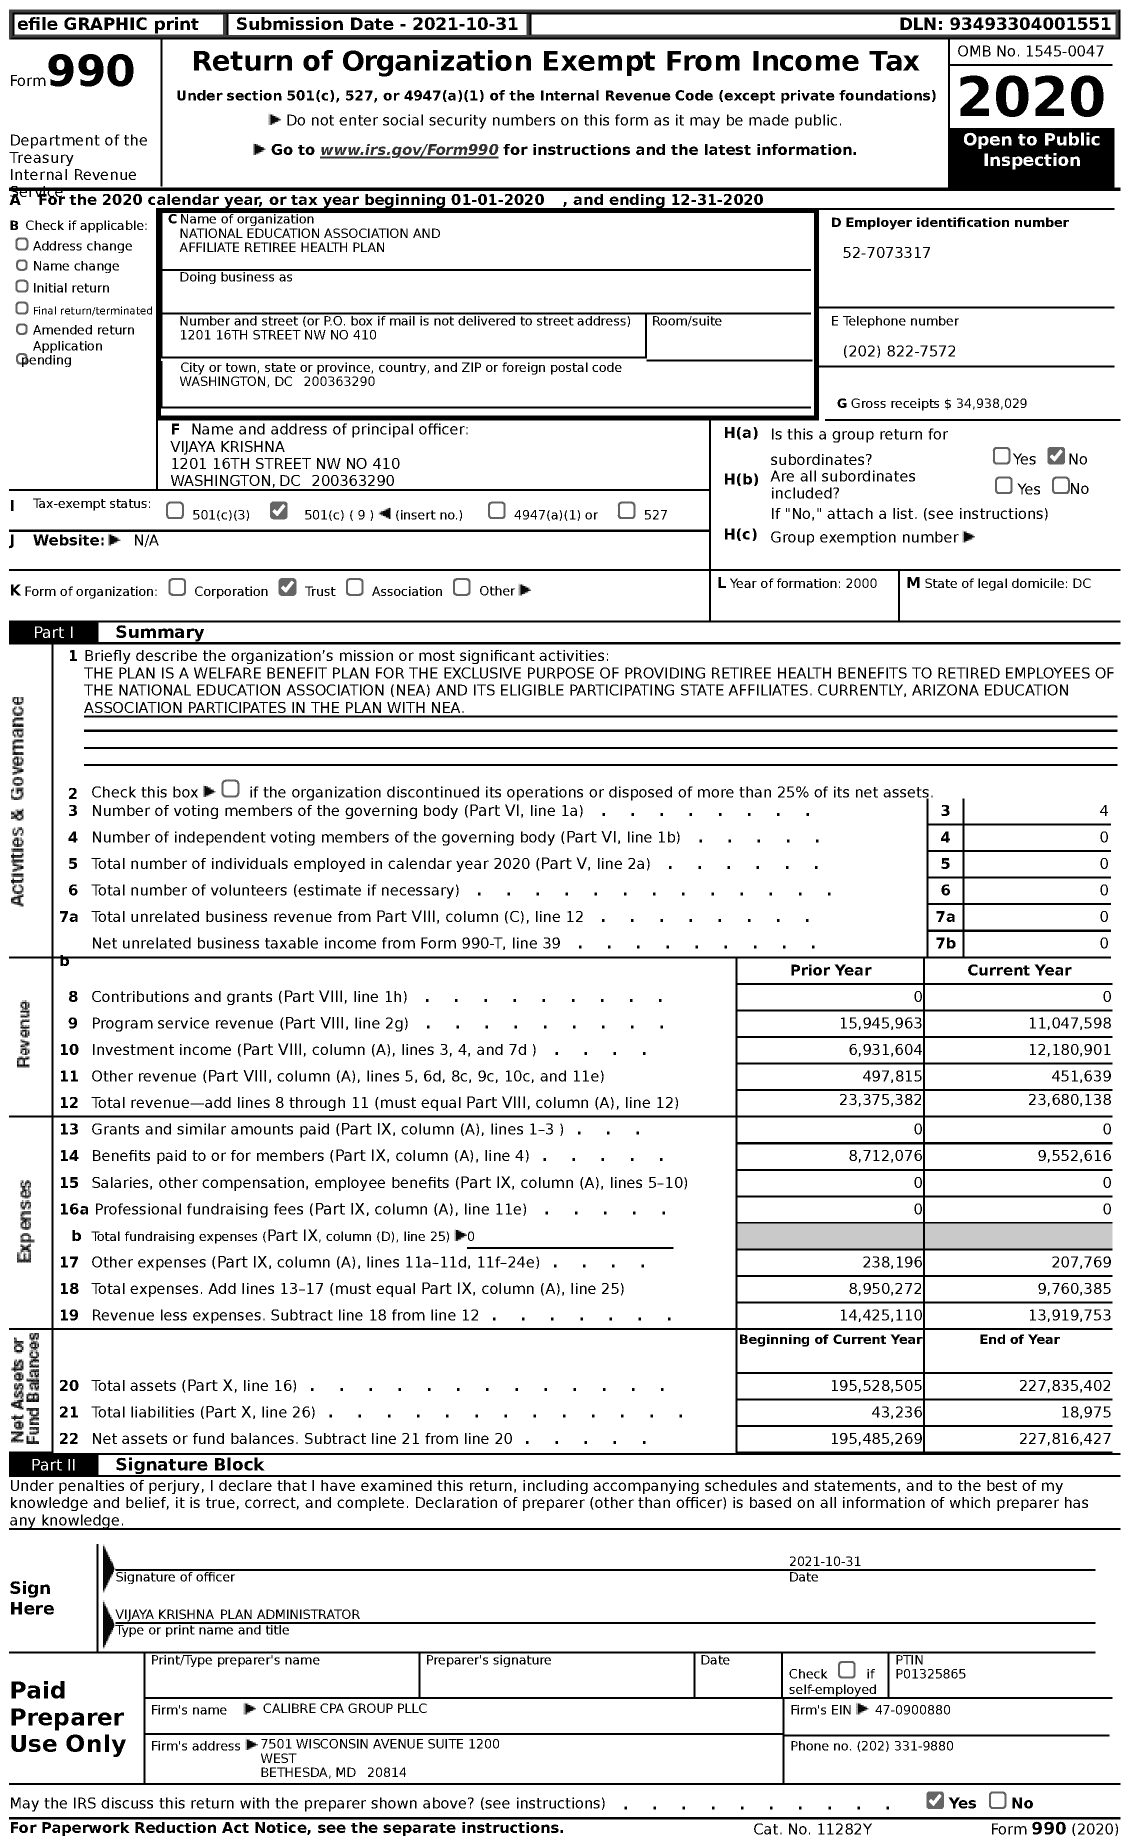 Image of first page of 2020 Form 990 for National Education Association and Affiliate Retiree Health Plan